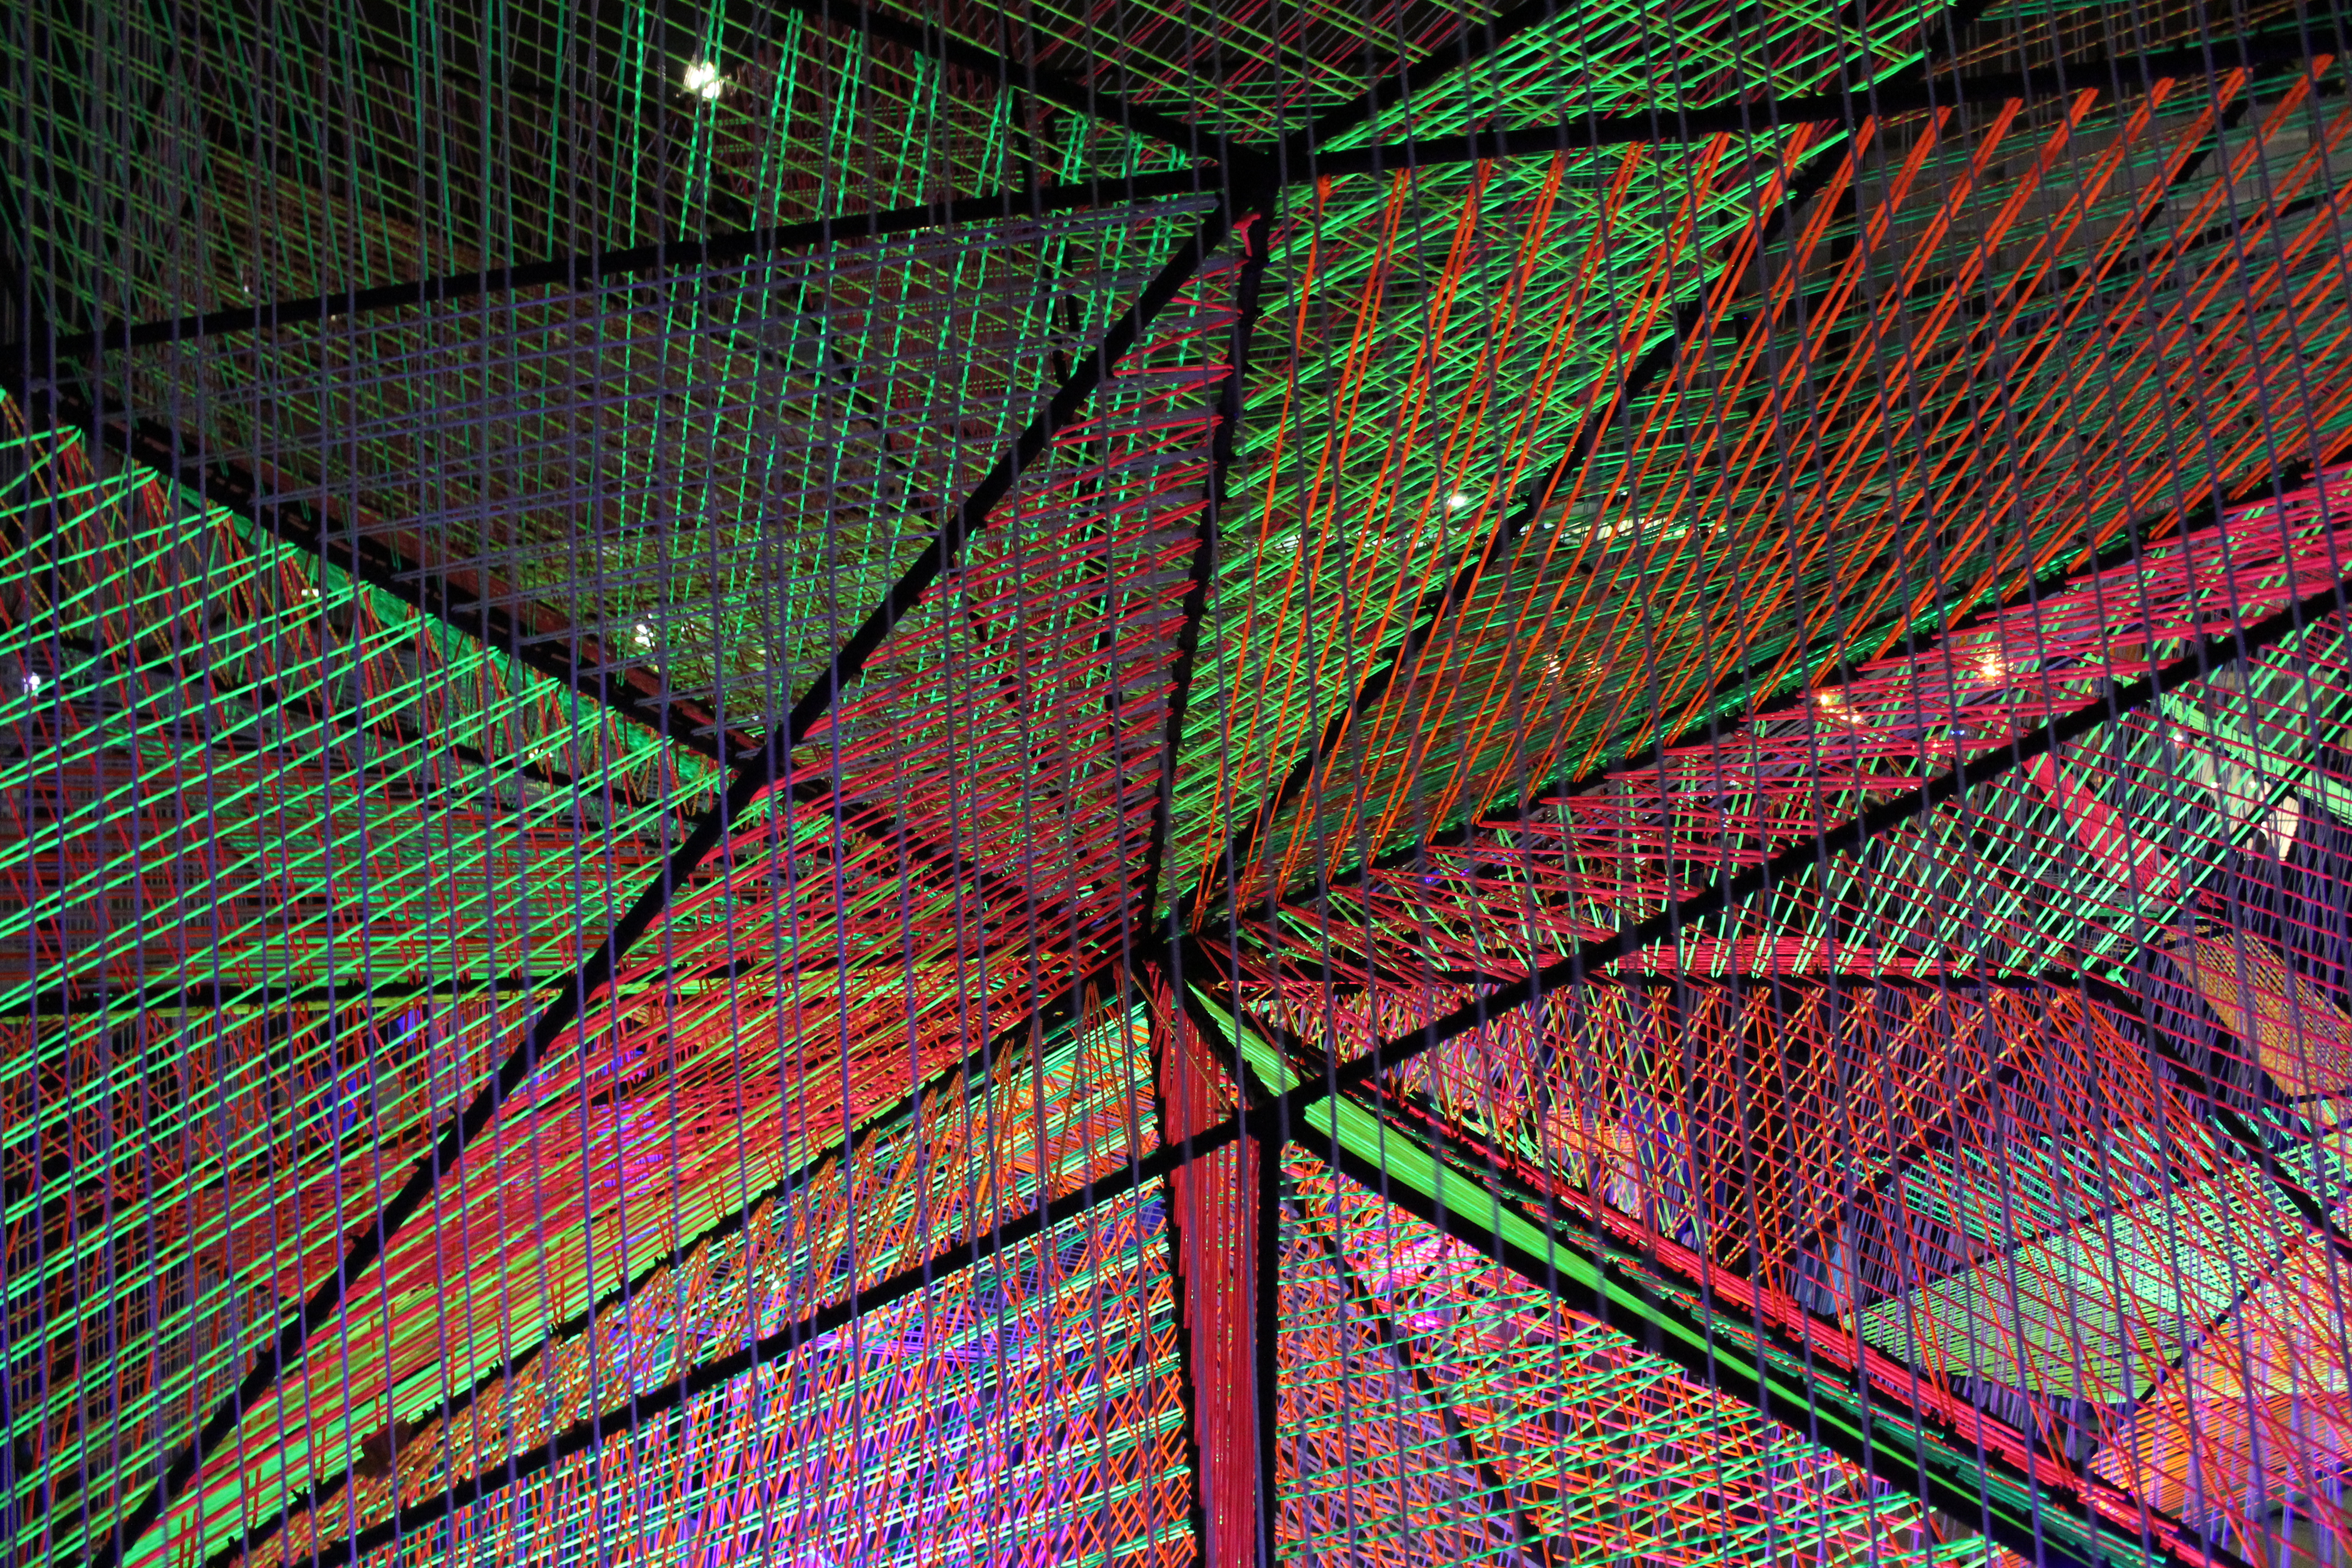 A light display with red and green threads in a mesh structure.